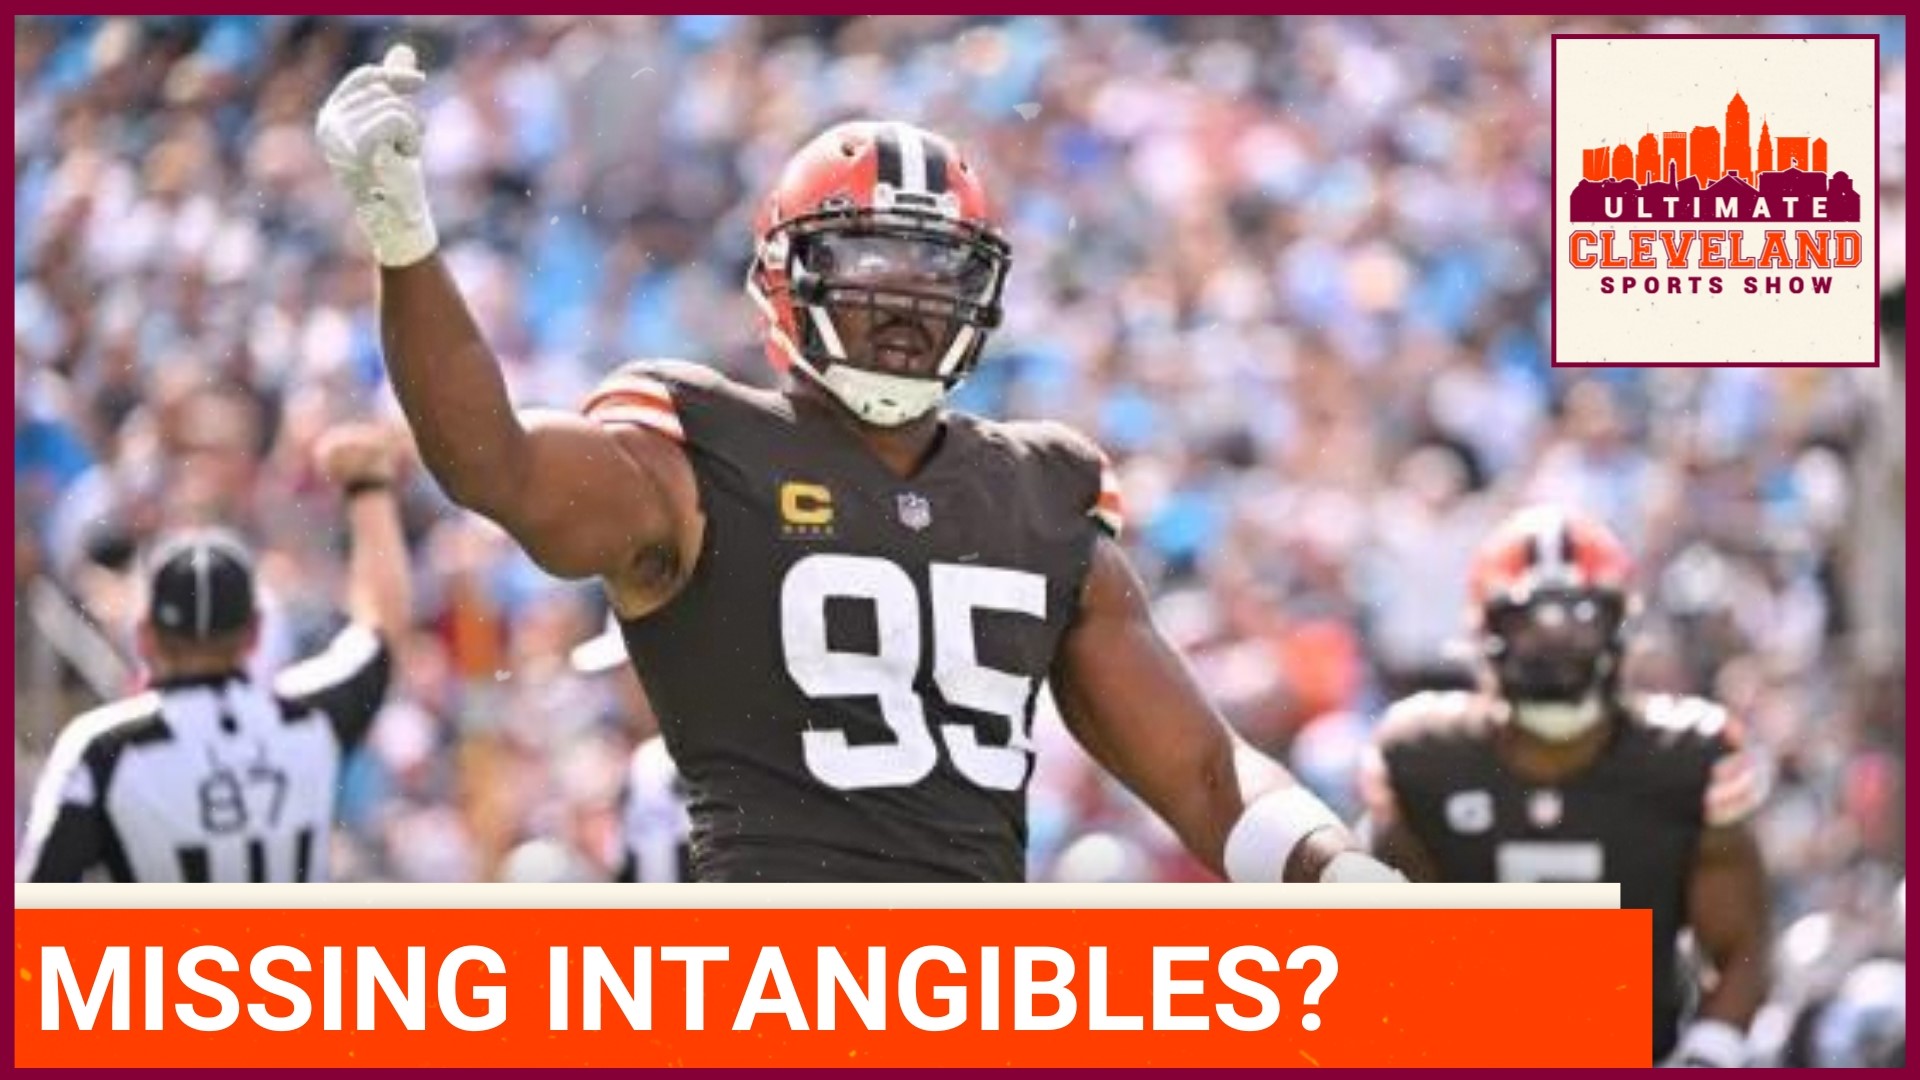 Is Myles Garrett missing something that's keeping him from reaching another level?